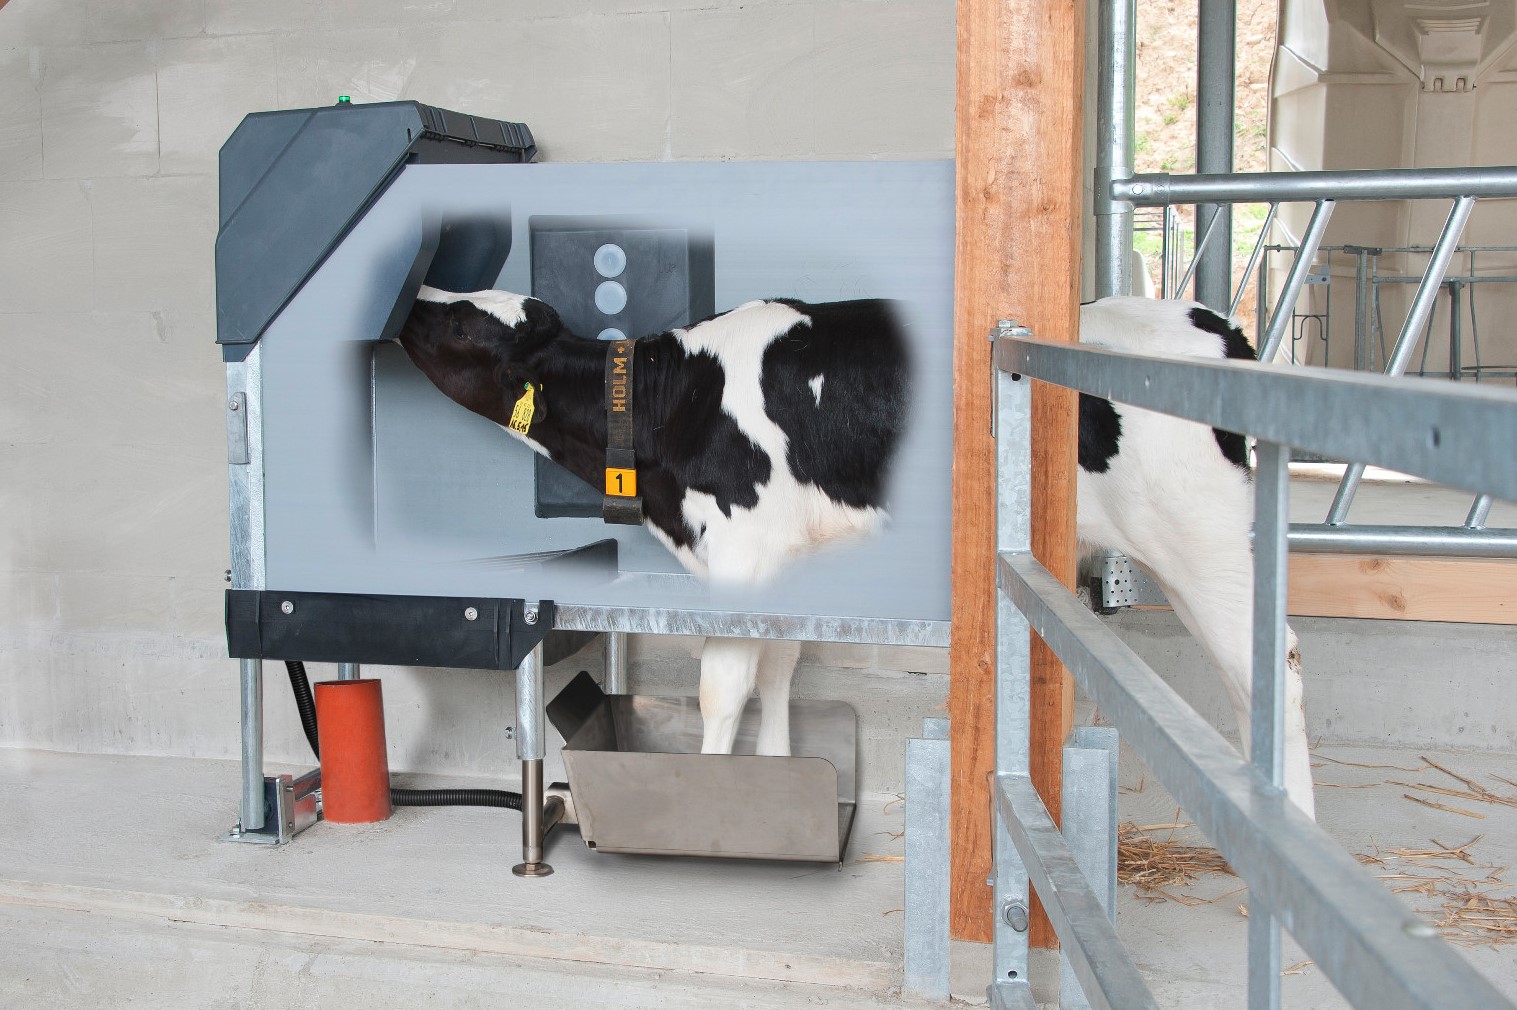 Calf feeding in a HygieneStation with front-foot scales